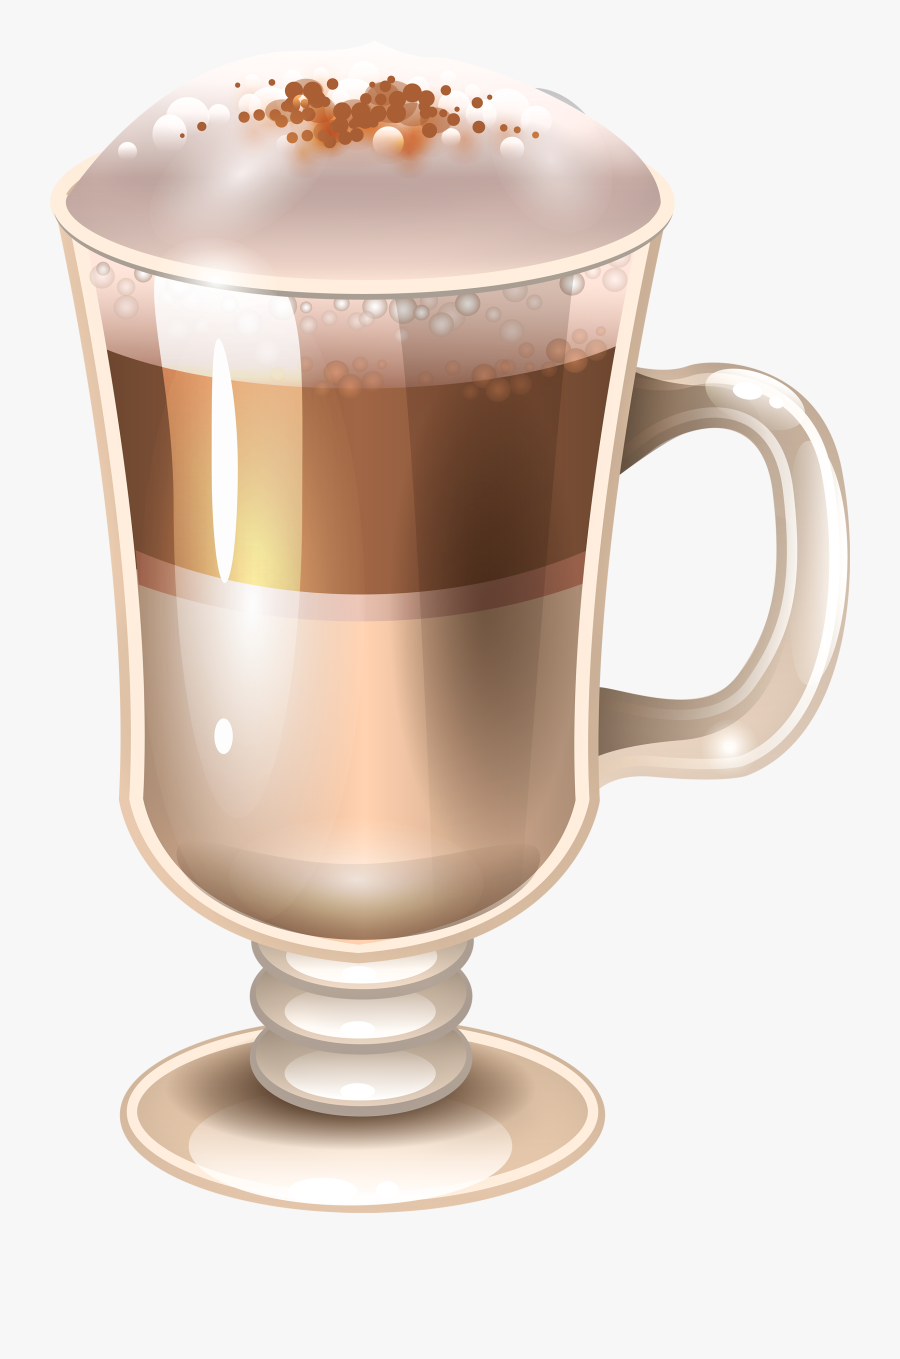 Coffee Clip Art Free Clipart Images - Coffee Drink Png, Transparent Clipart